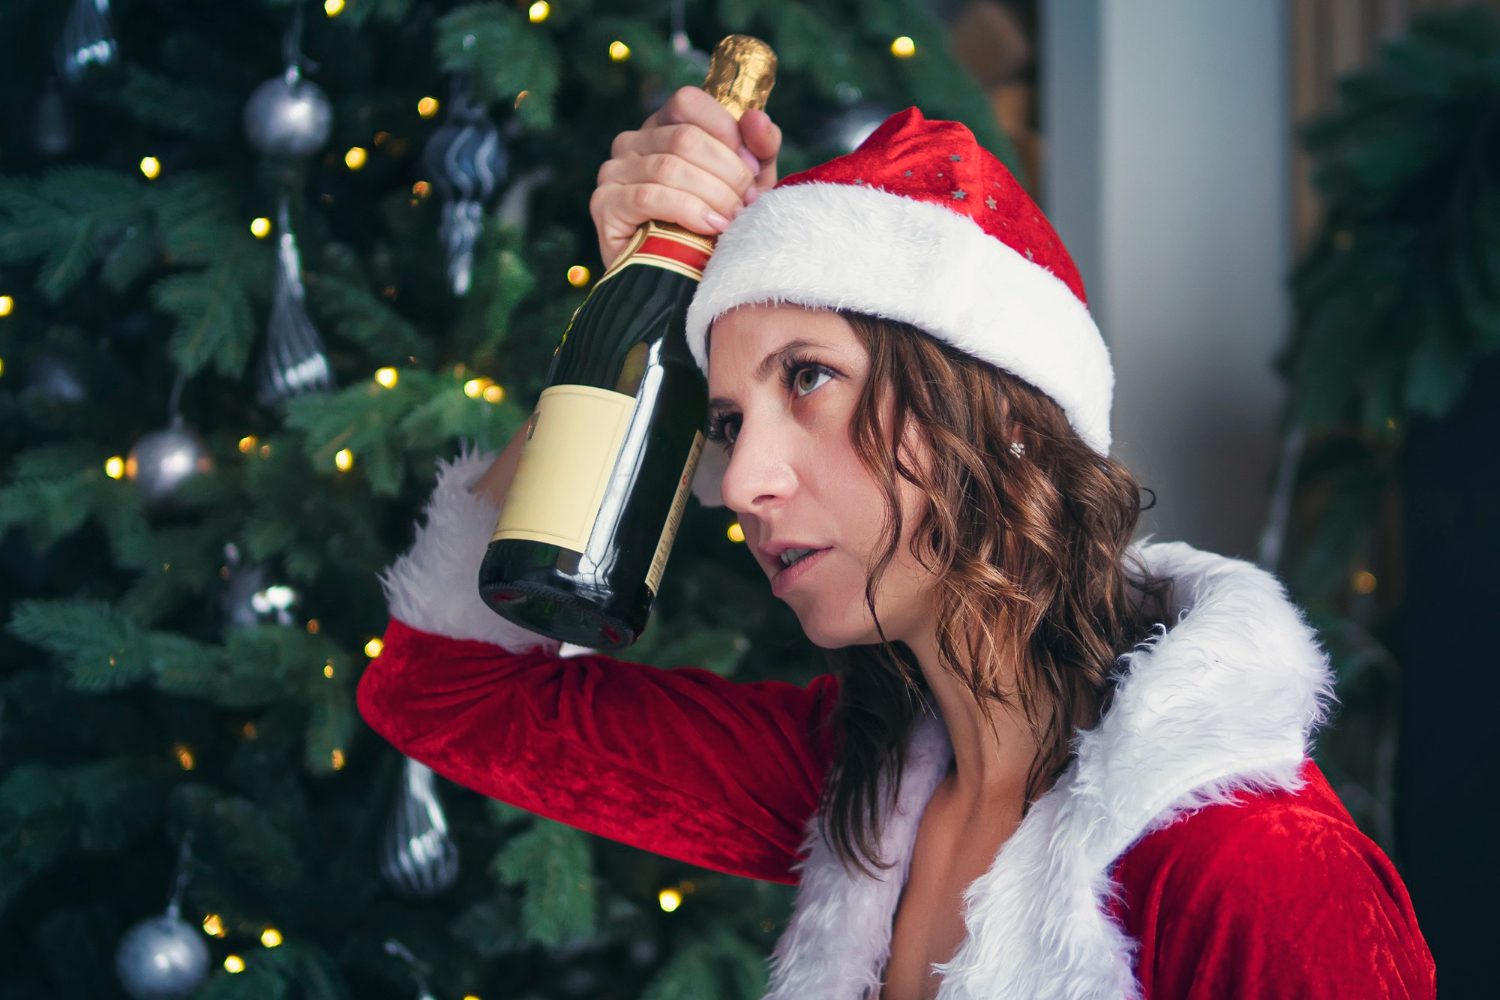 woman holding bottle champagne christmas tree hold his head headache from drinking alcohol hangover after holiday